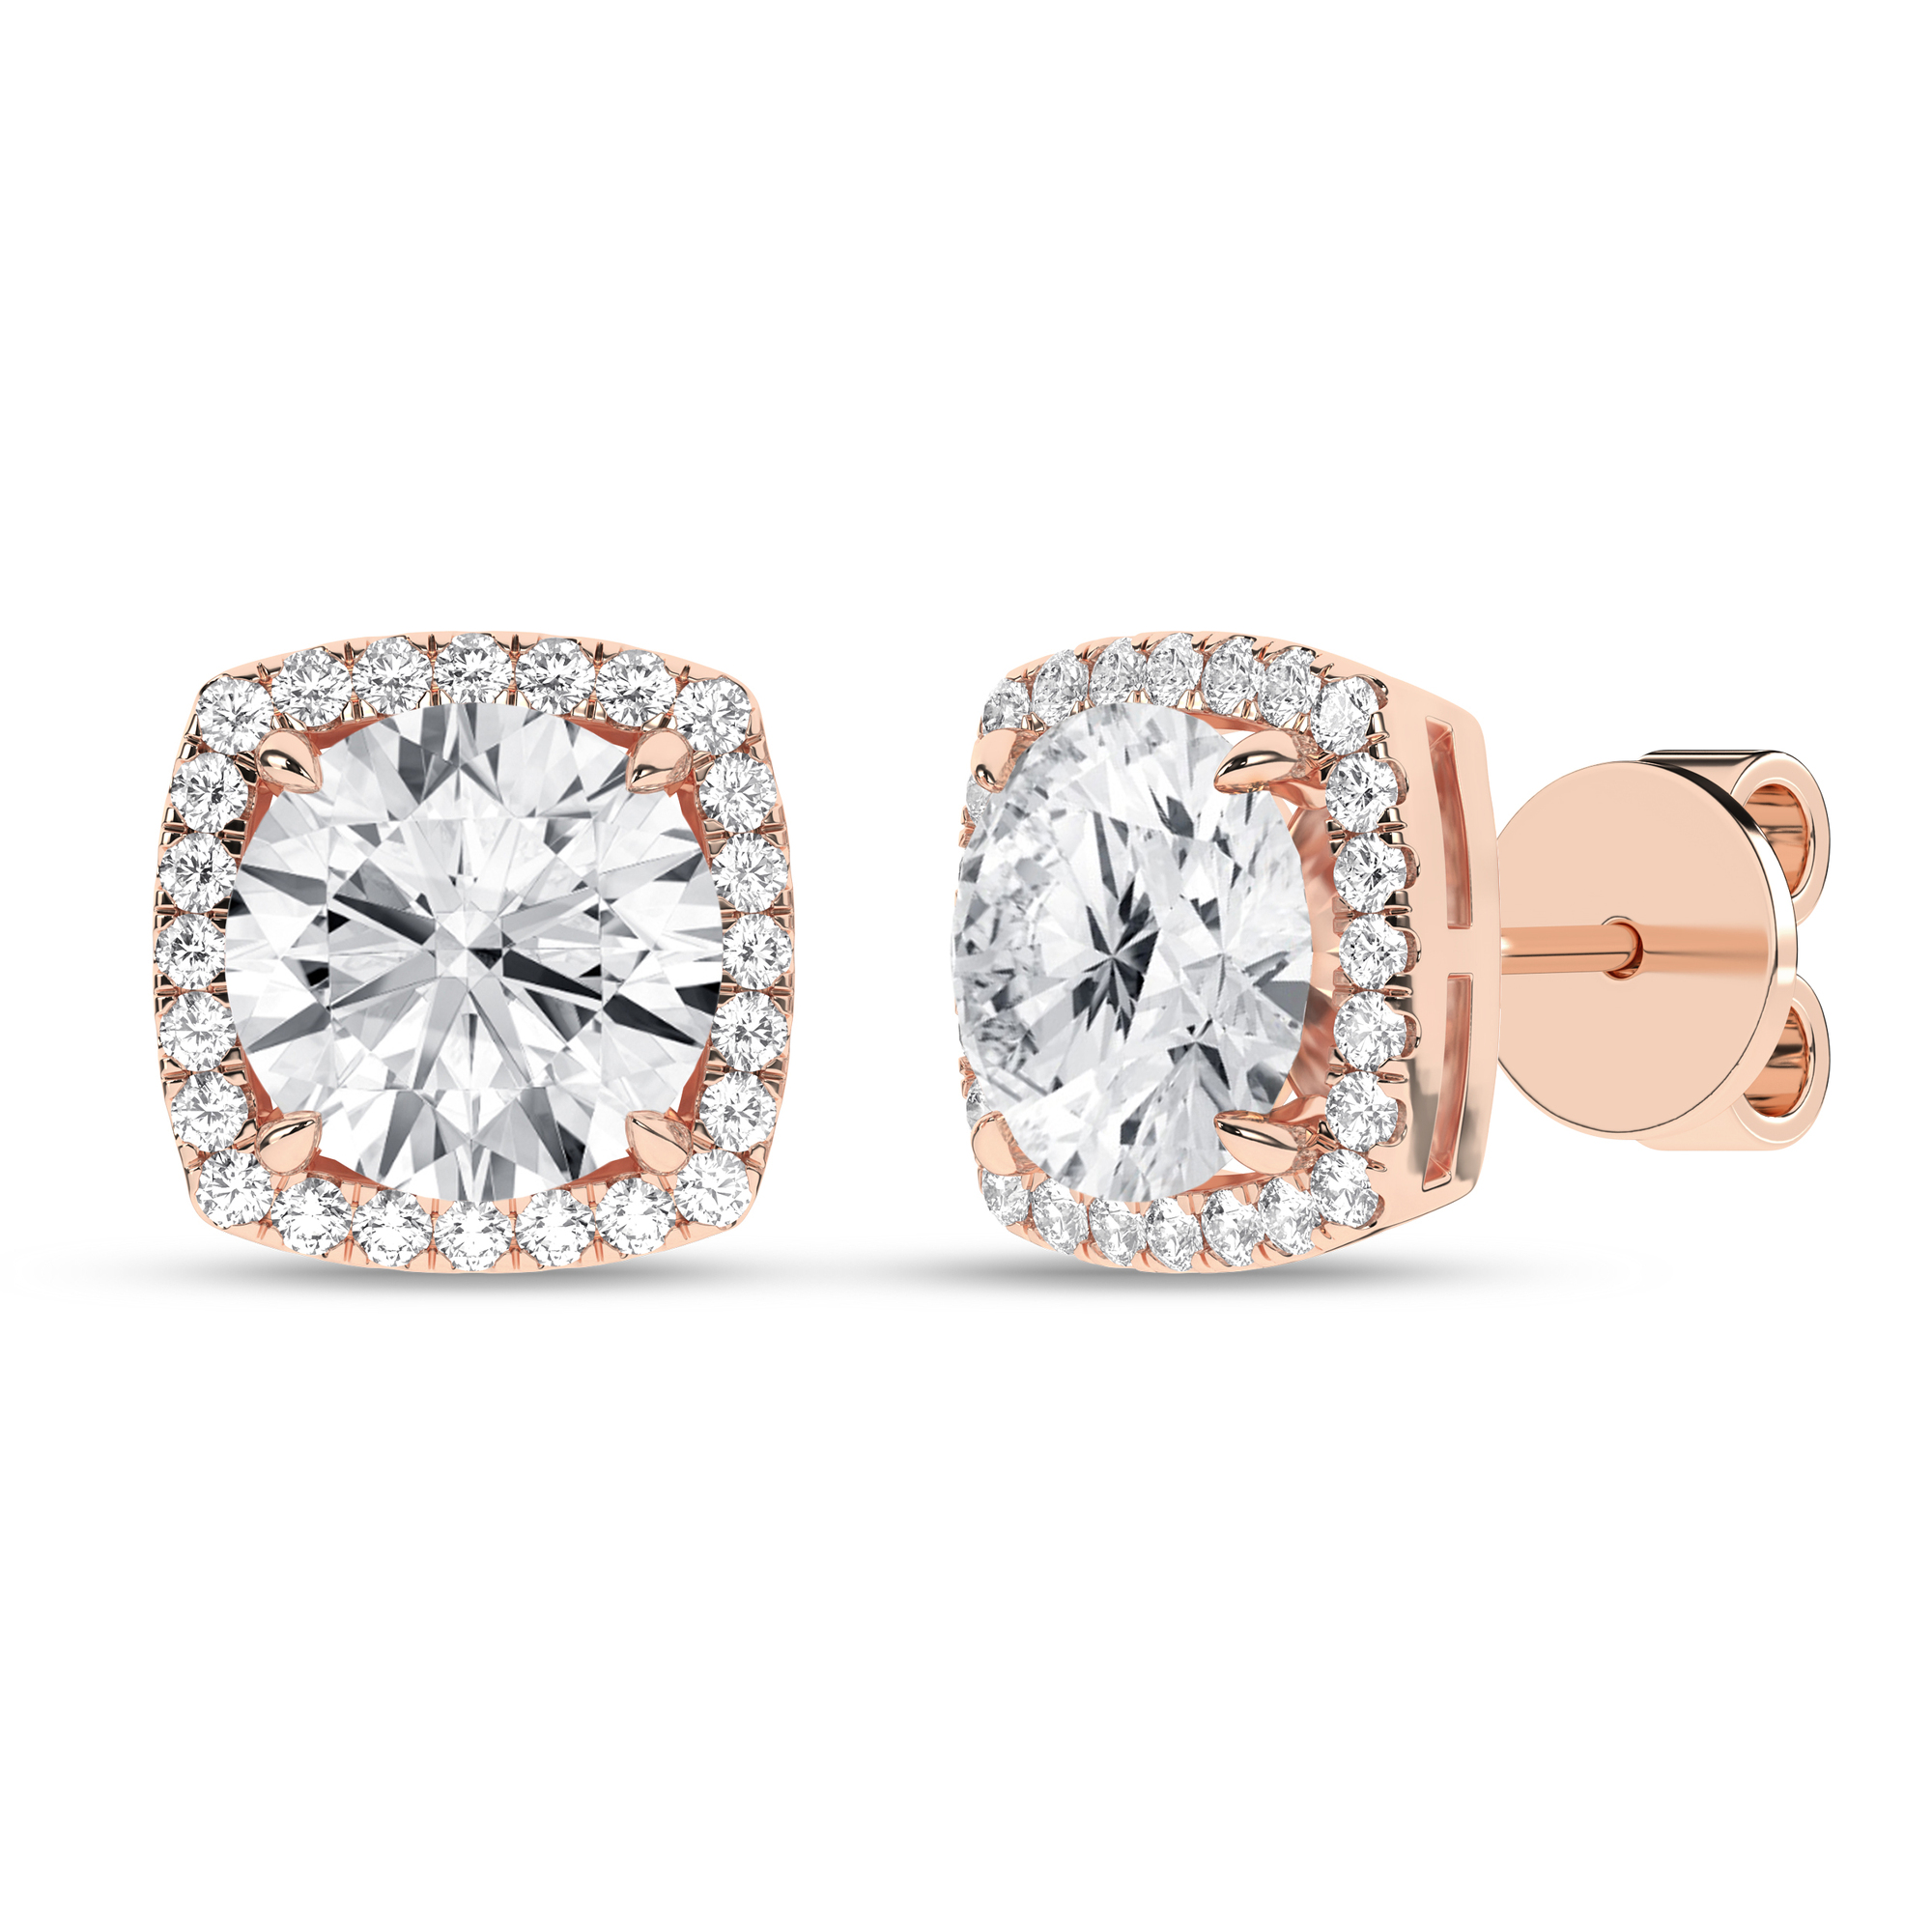 3.25ct. Diamond Halo Earring (Cushion Shape With Round Centre )